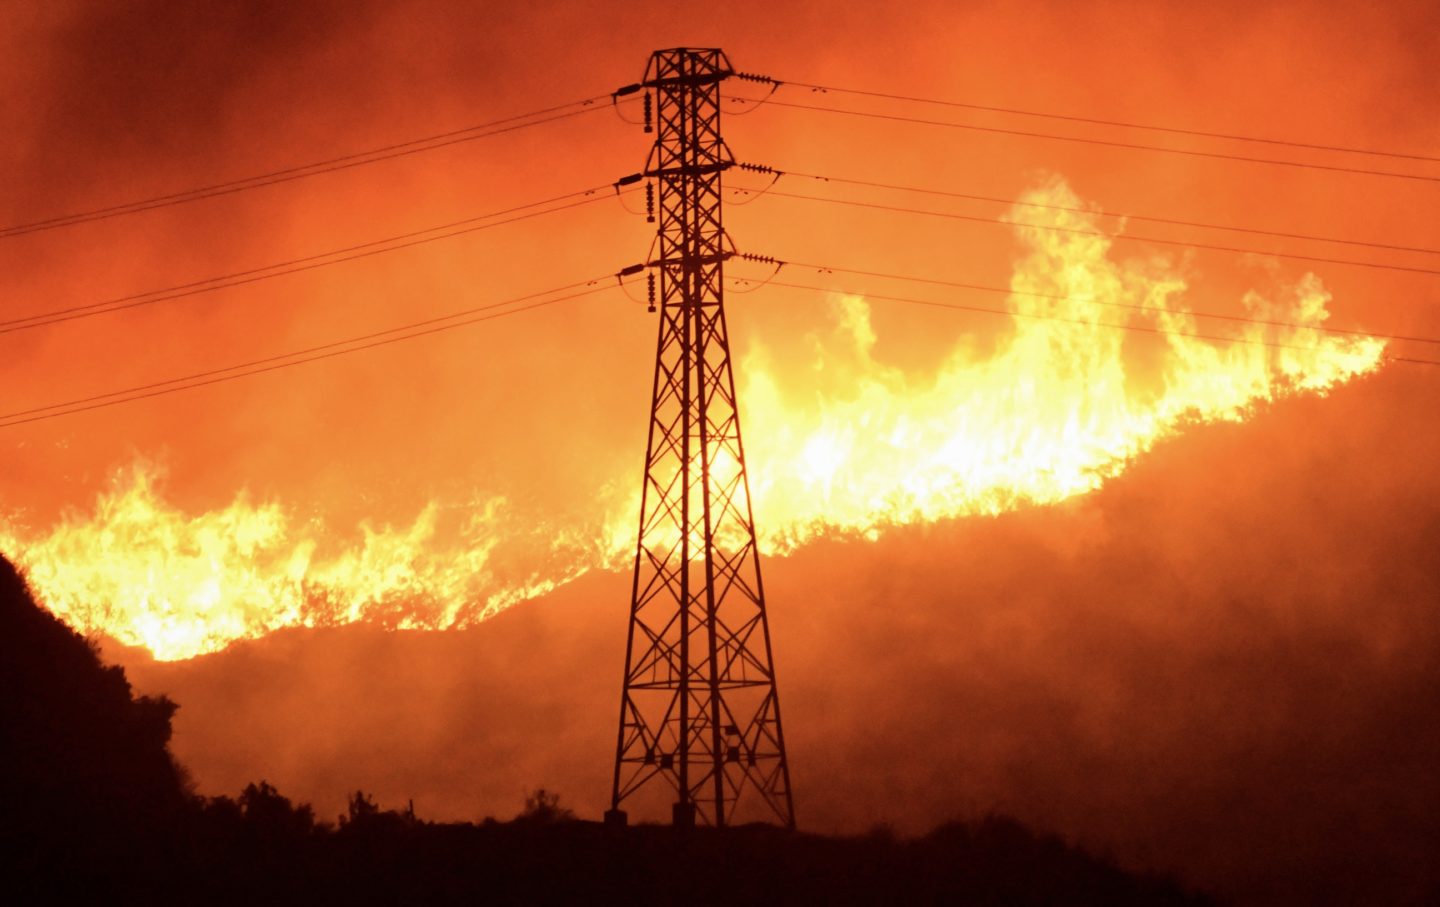 California Utility Says Its Equipment May Be Linked to Fire